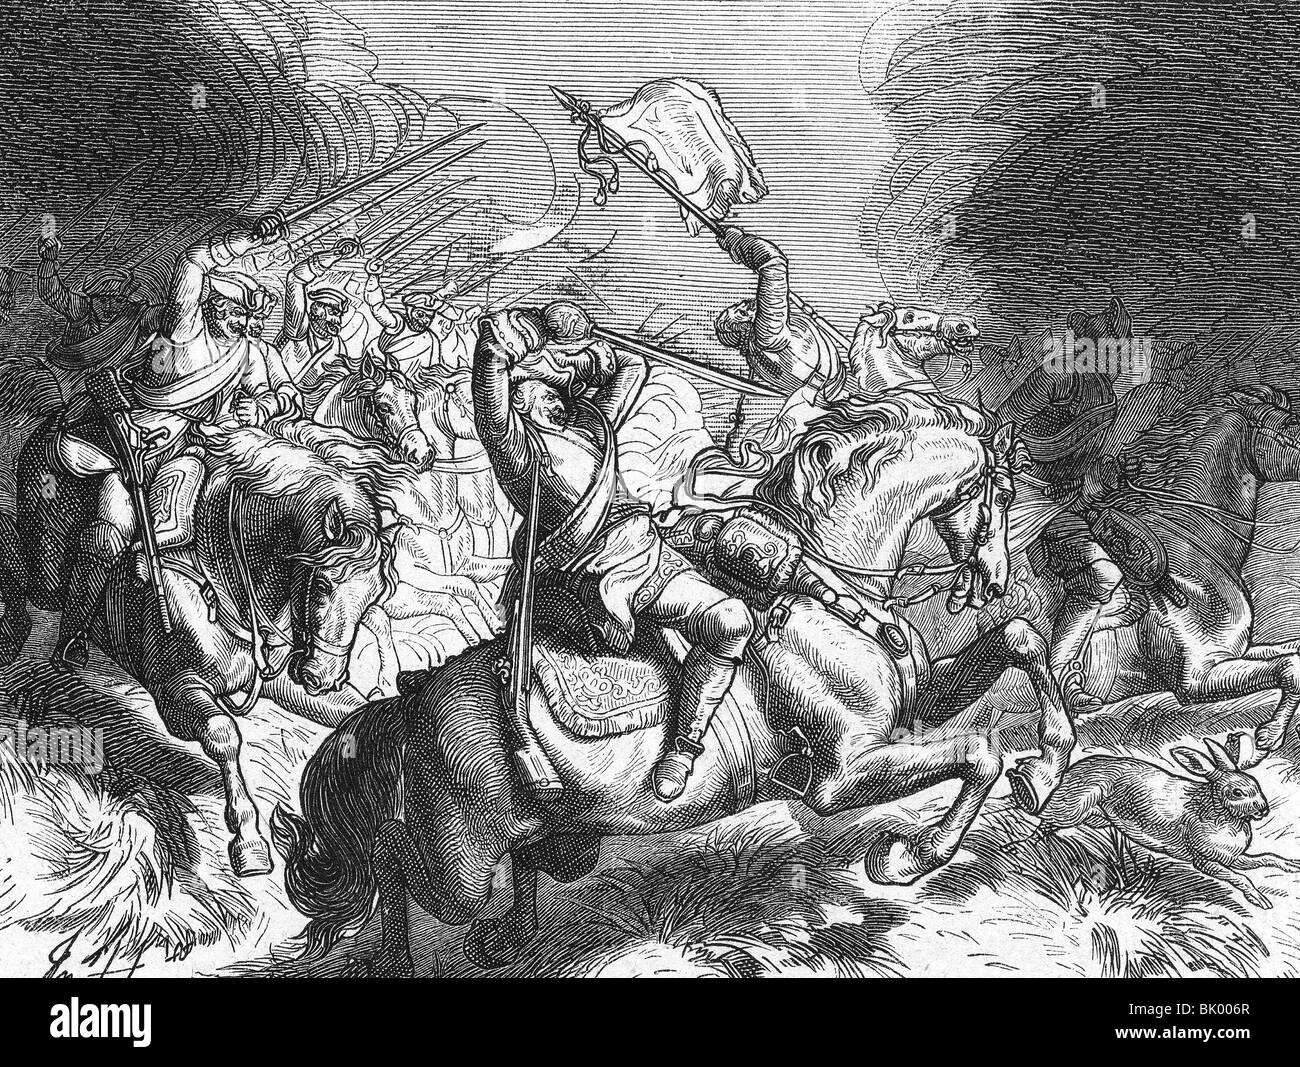 events, Seven Years War 1756 - 1763, Battle of Rossbach, 5.11.1757, charge of Prussian cuirassiers, wood engraving, 19th century, Third Silesian War, cavralry, General Friedrich Wilhelm von Seydlitz, Saxony-Anhalt, Saxony Anhalt, Germany, 18th century, historic, historical, people, Stock Photo